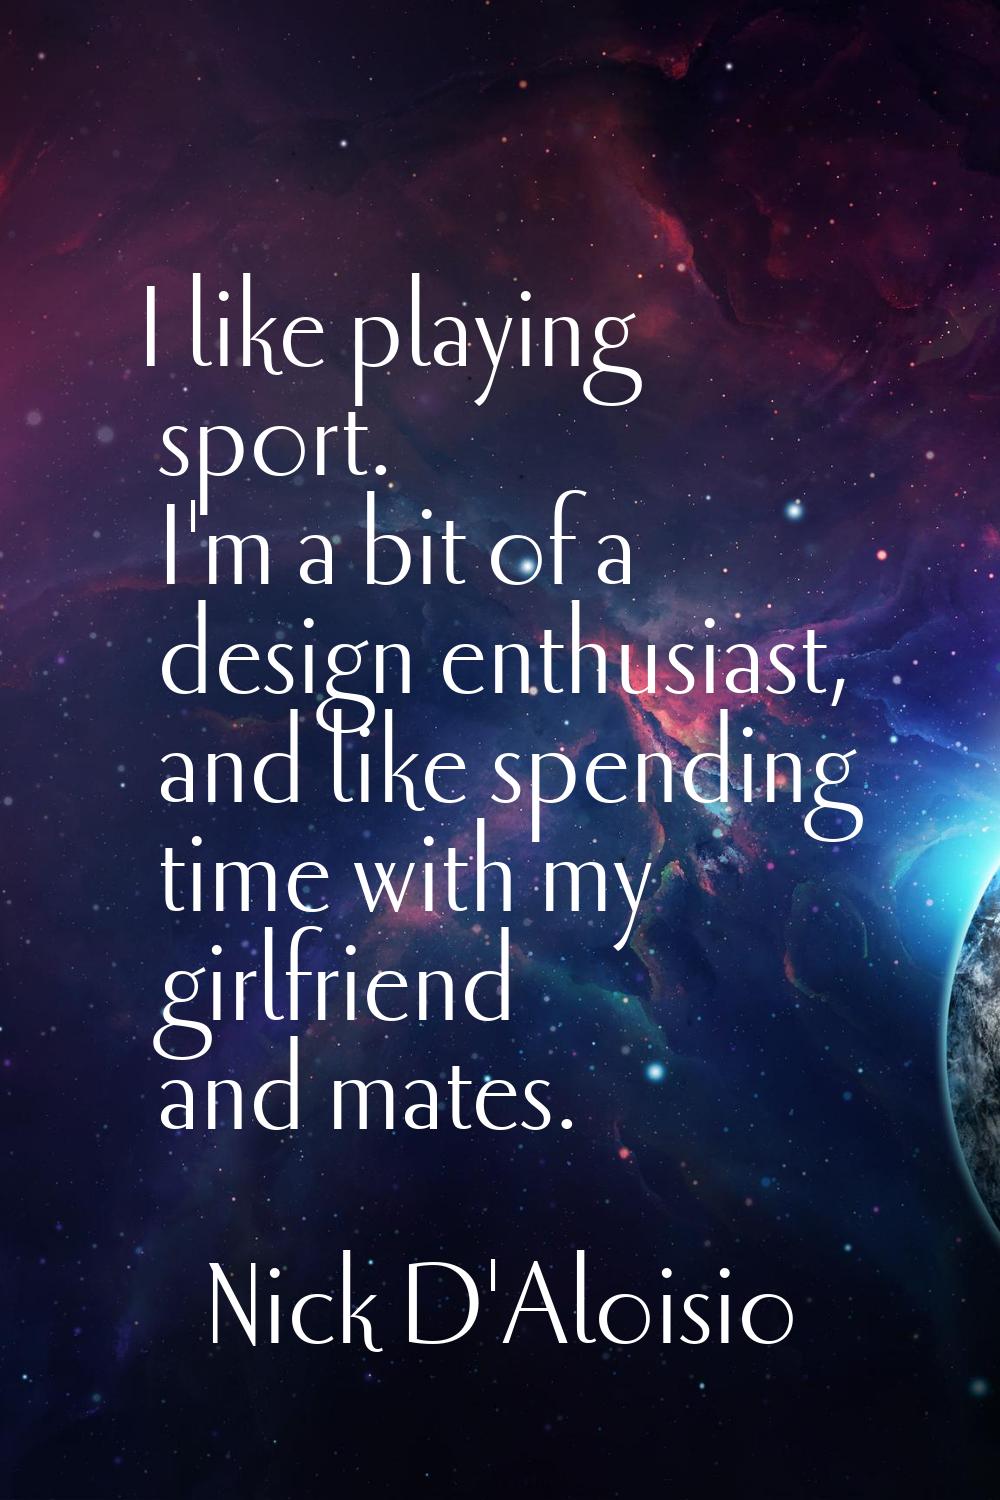 I like playing sport. I'm a bit of a design enthusiast, and like spending time with my girlfriend a